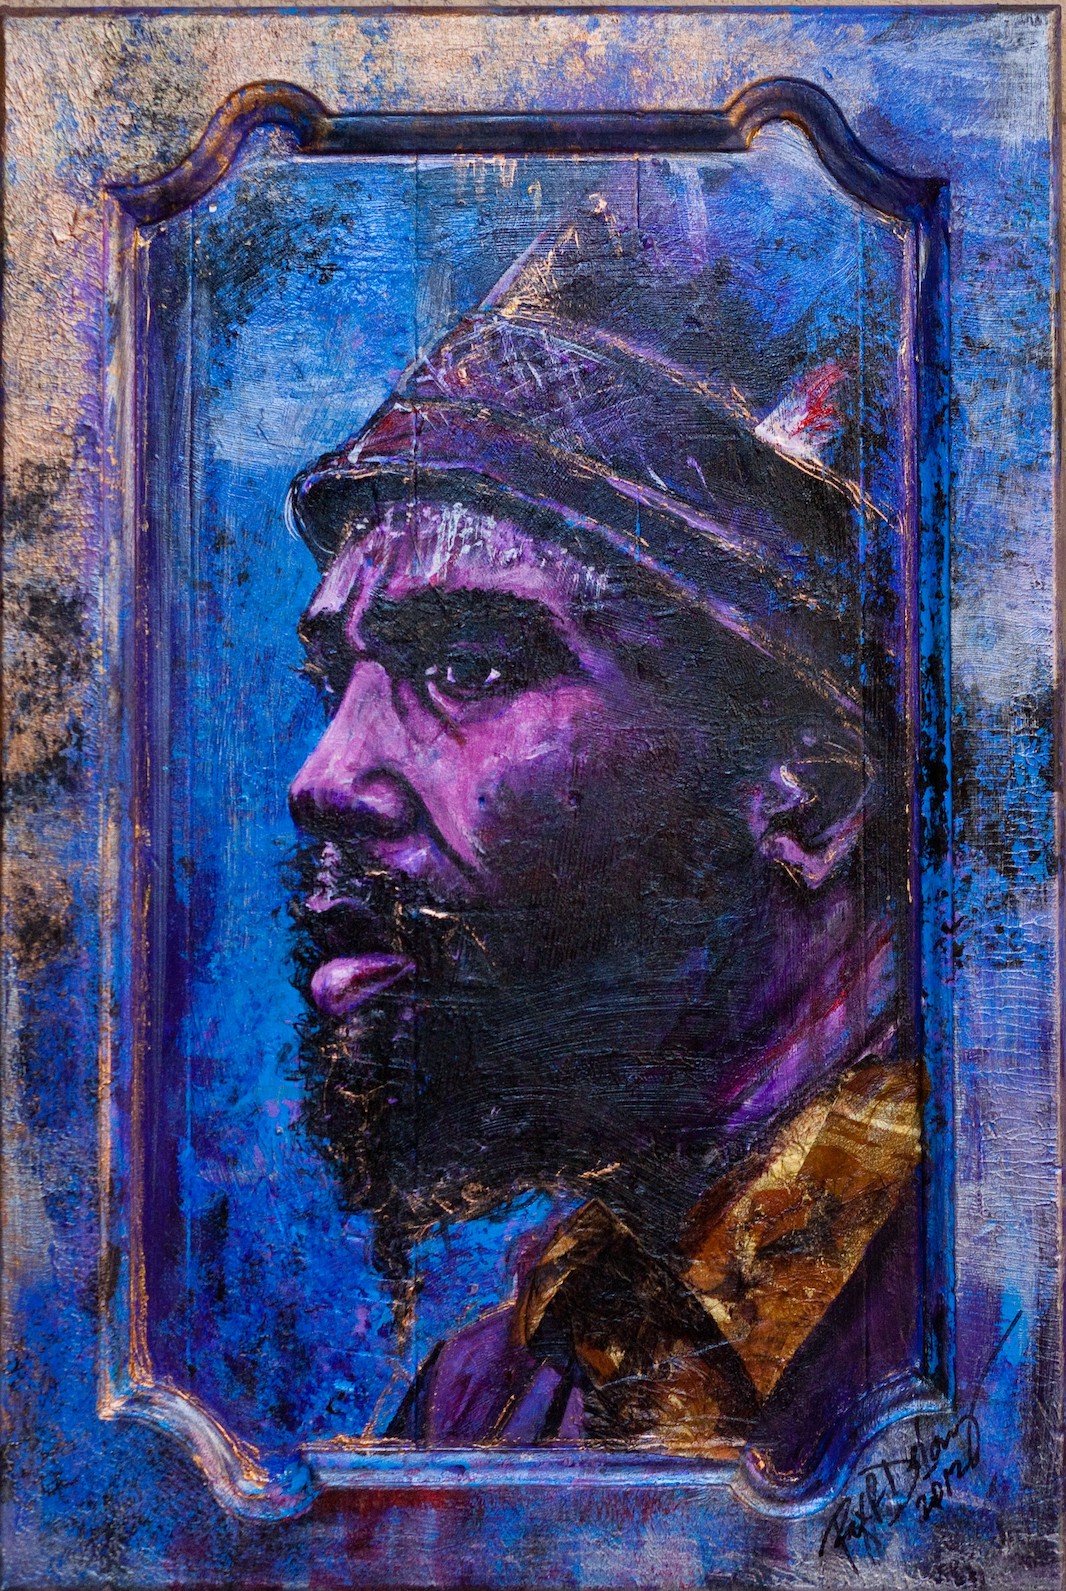    Thelonious Monk  , 27” x 15”, mixed media on wood 